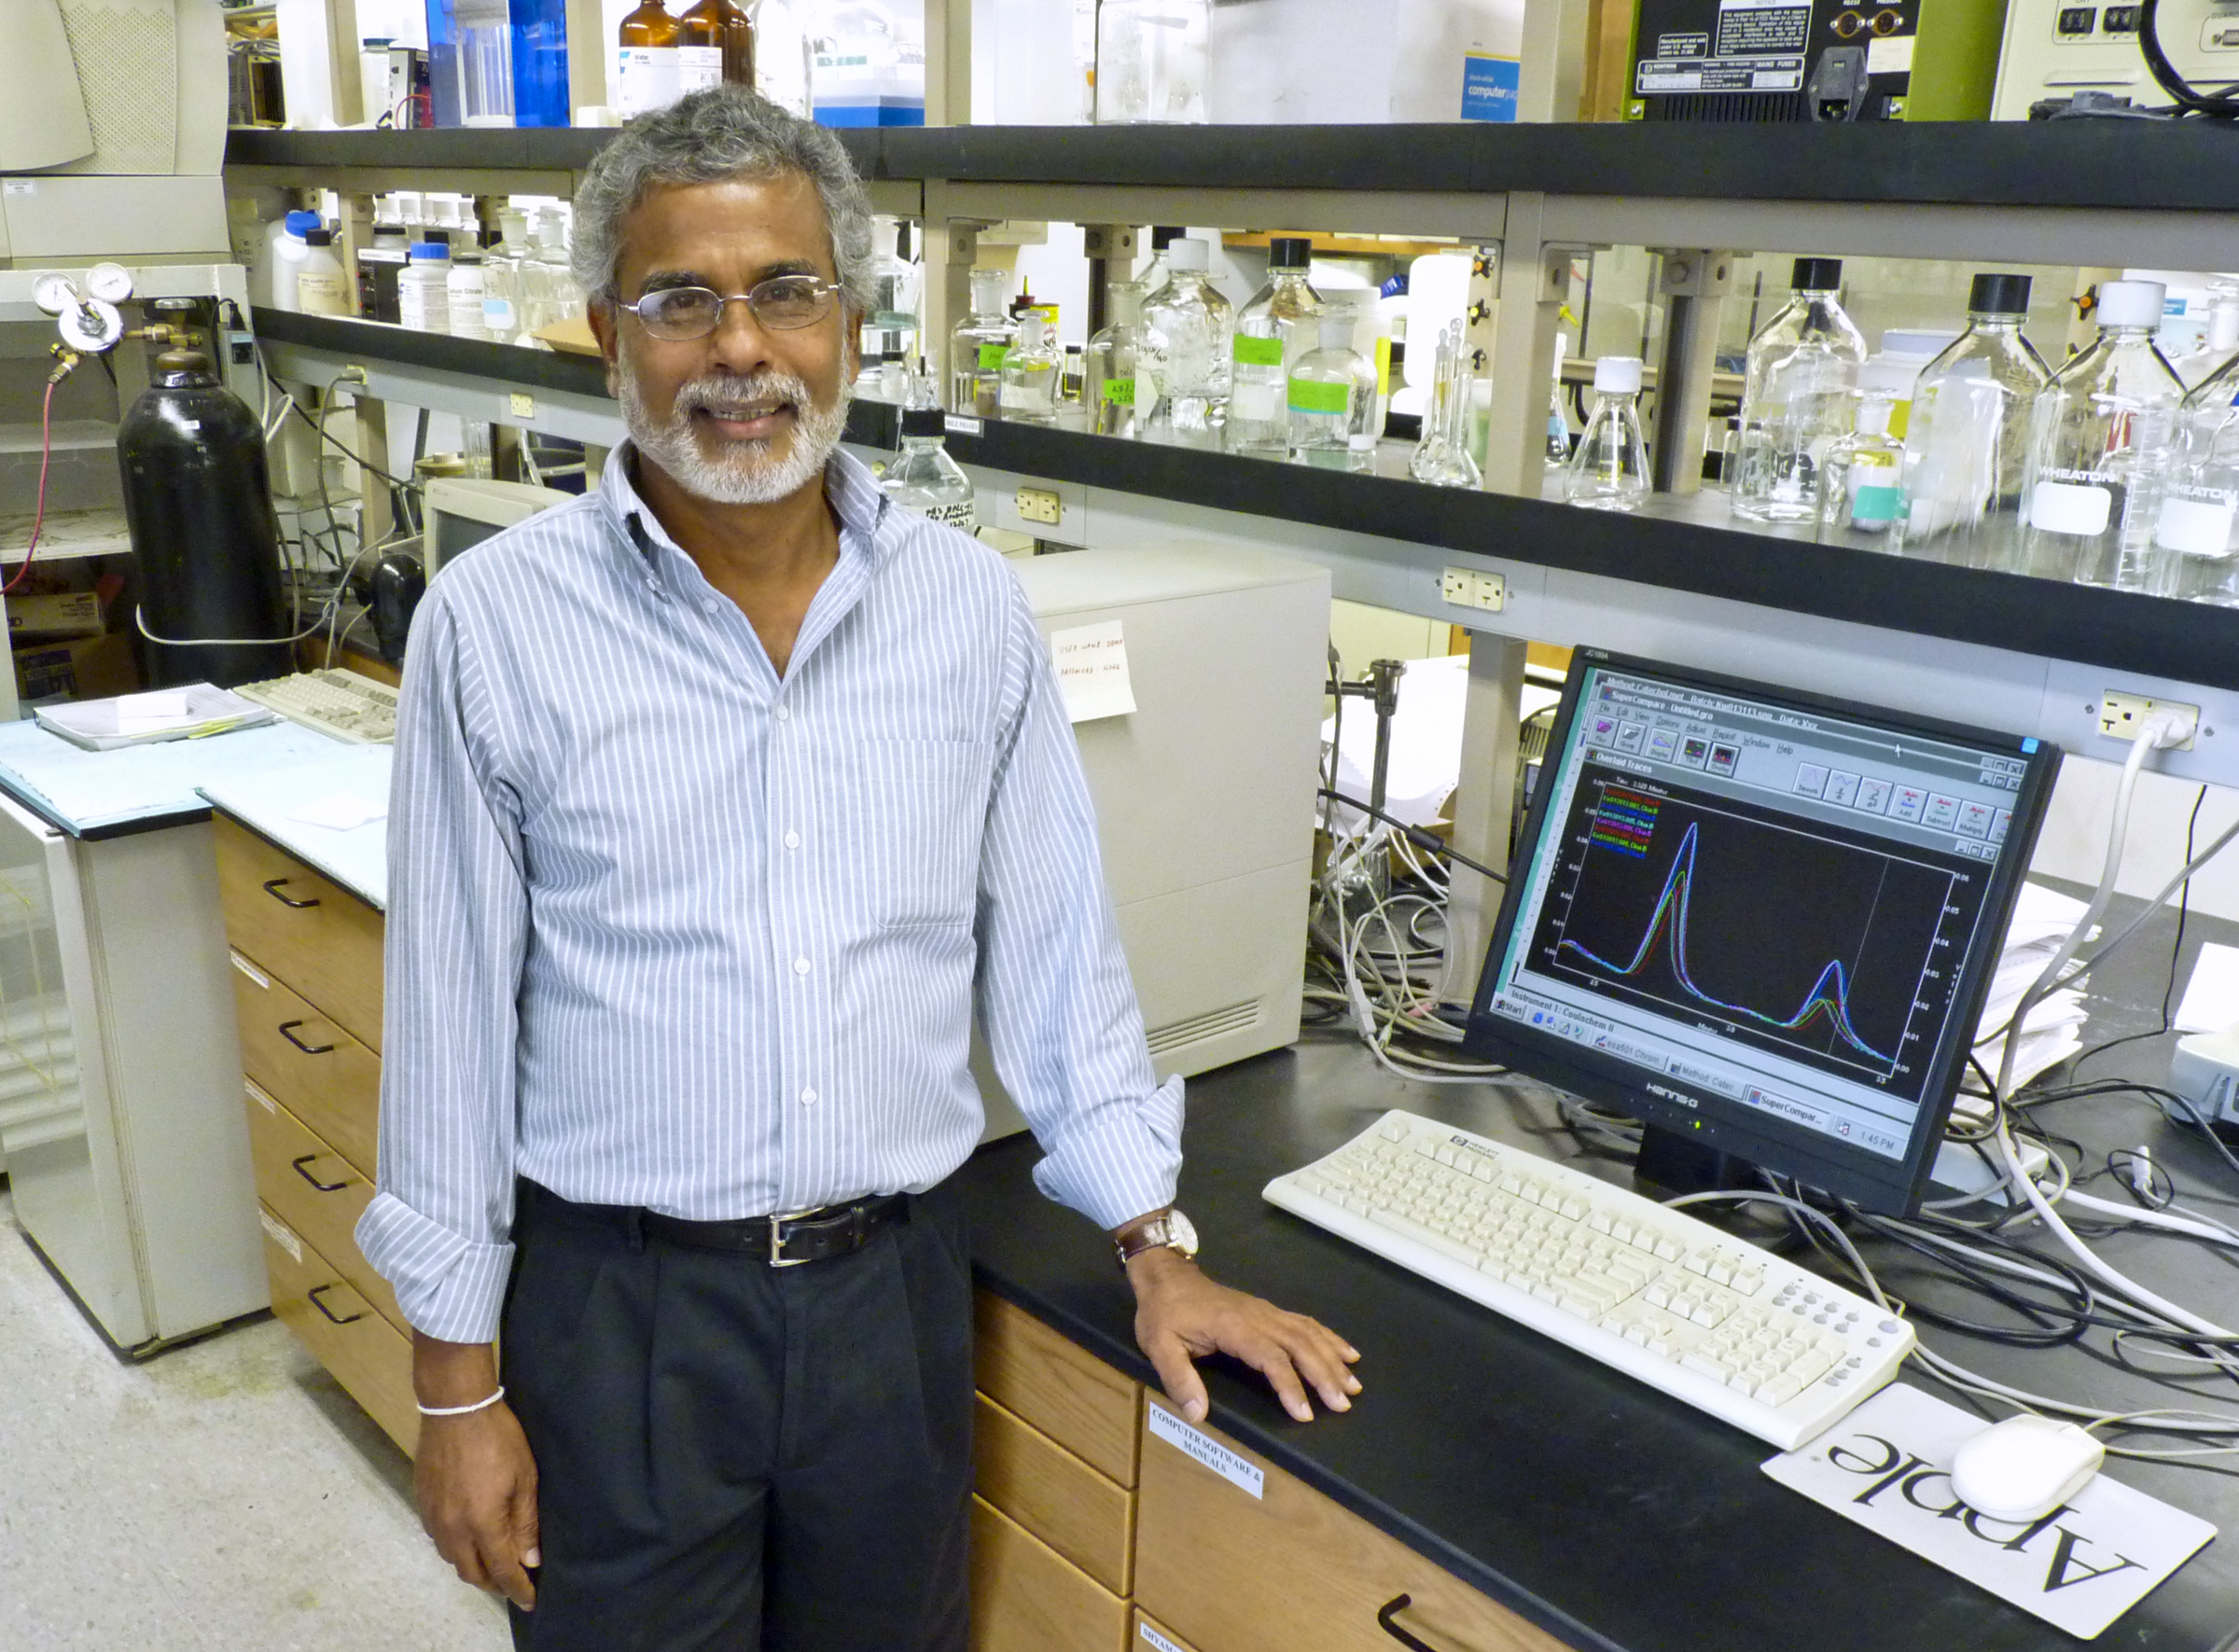 WSU biochemistry professor Kandatege Wimalasena is working in his lab to find ways to better understand, and help prevent, the underlying causes of Parkinson's disease.